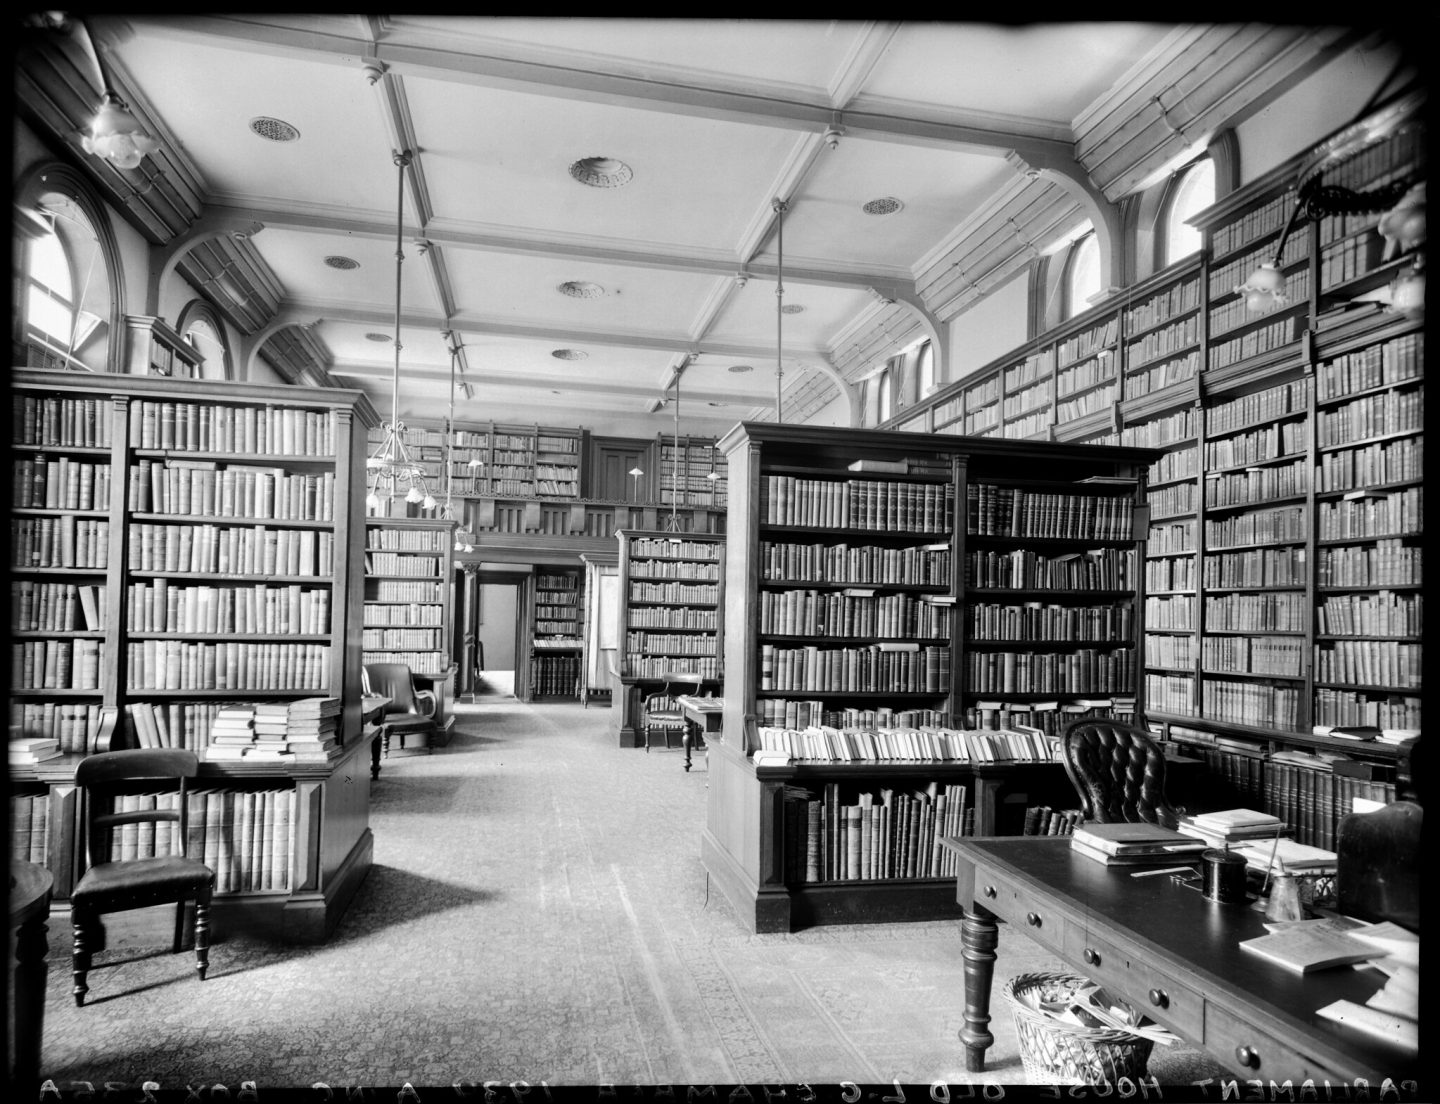 For decades the library was housed in Old Parliament House's House of Assembly chamber, before moving to its current location in the 1930s